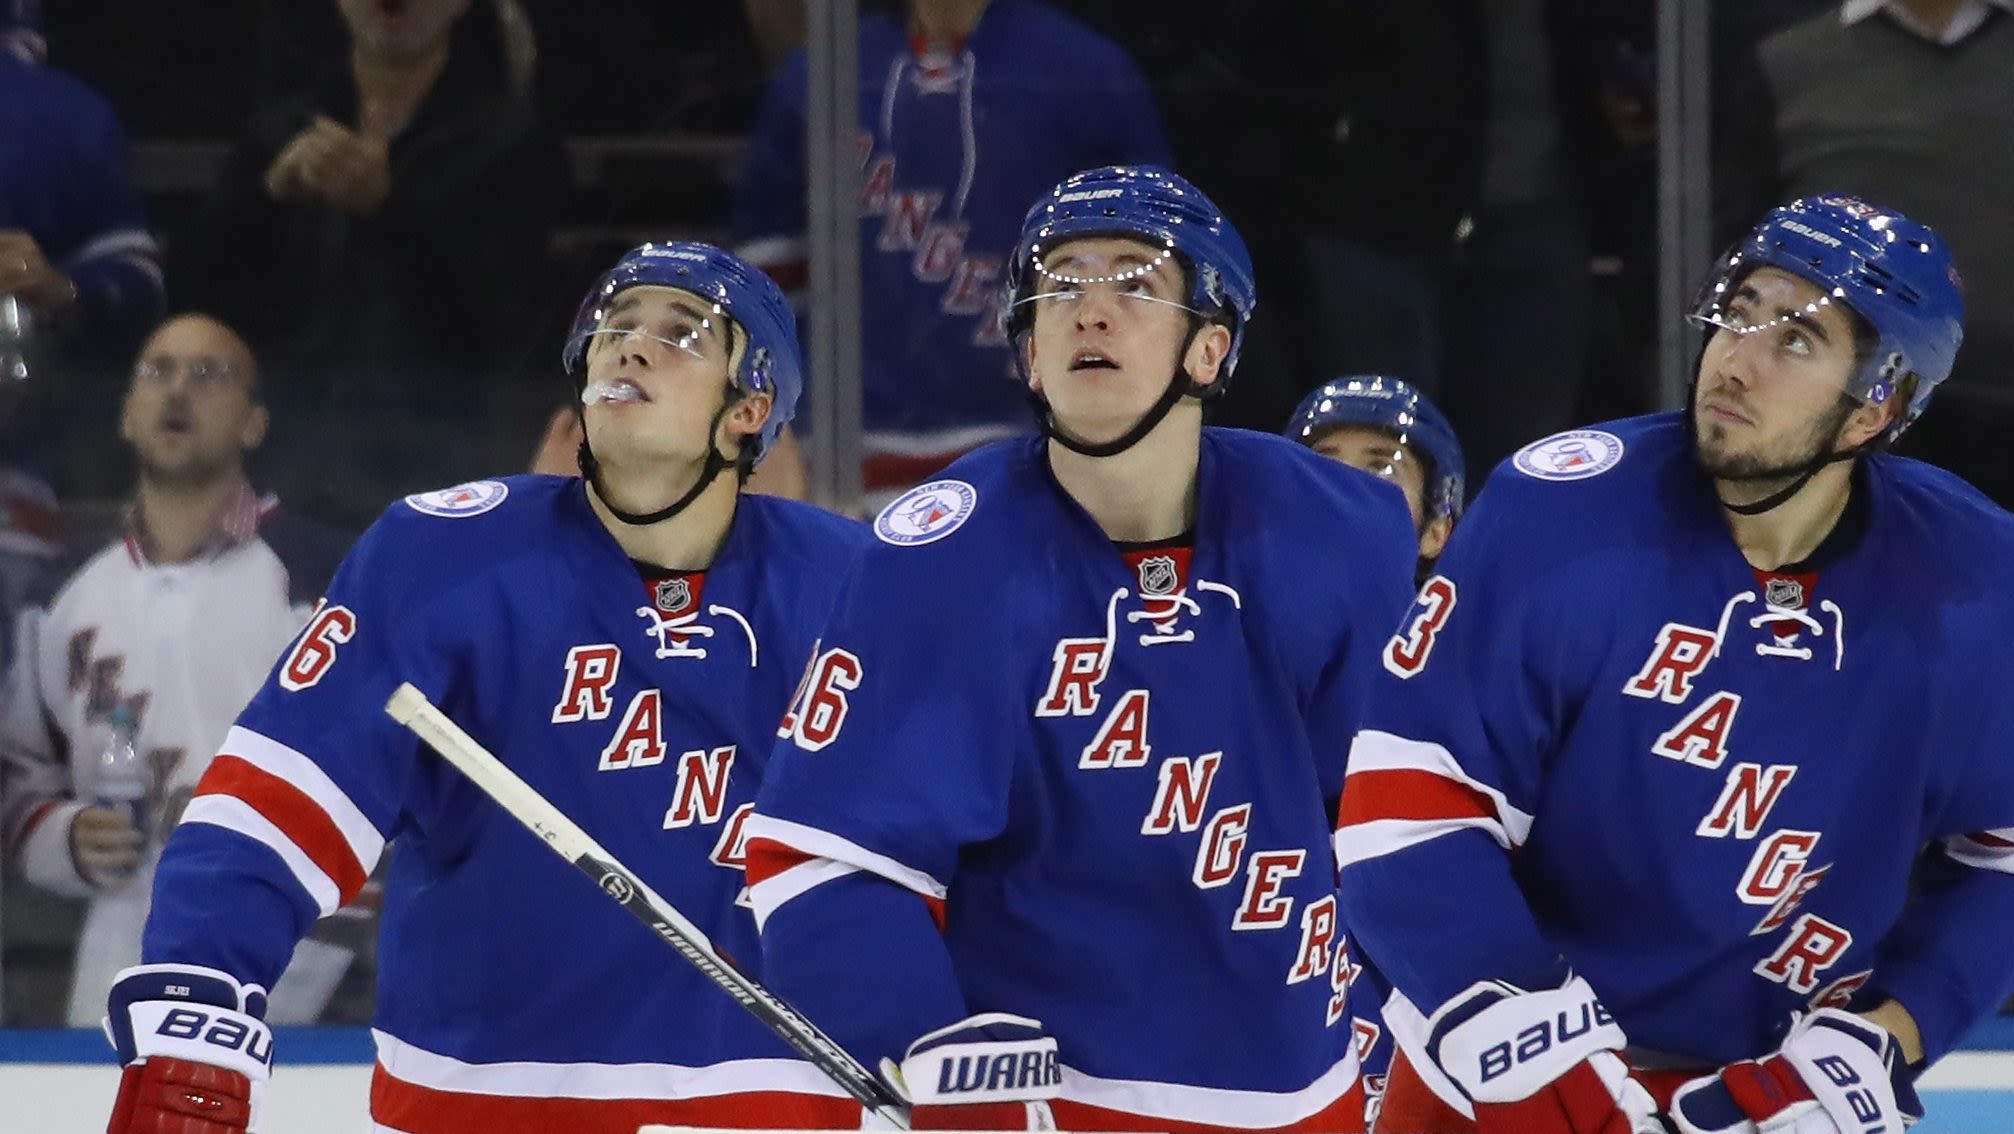 Rangers’ Forward Out ‘Week-to-Week’ Following 13 Roster Moves